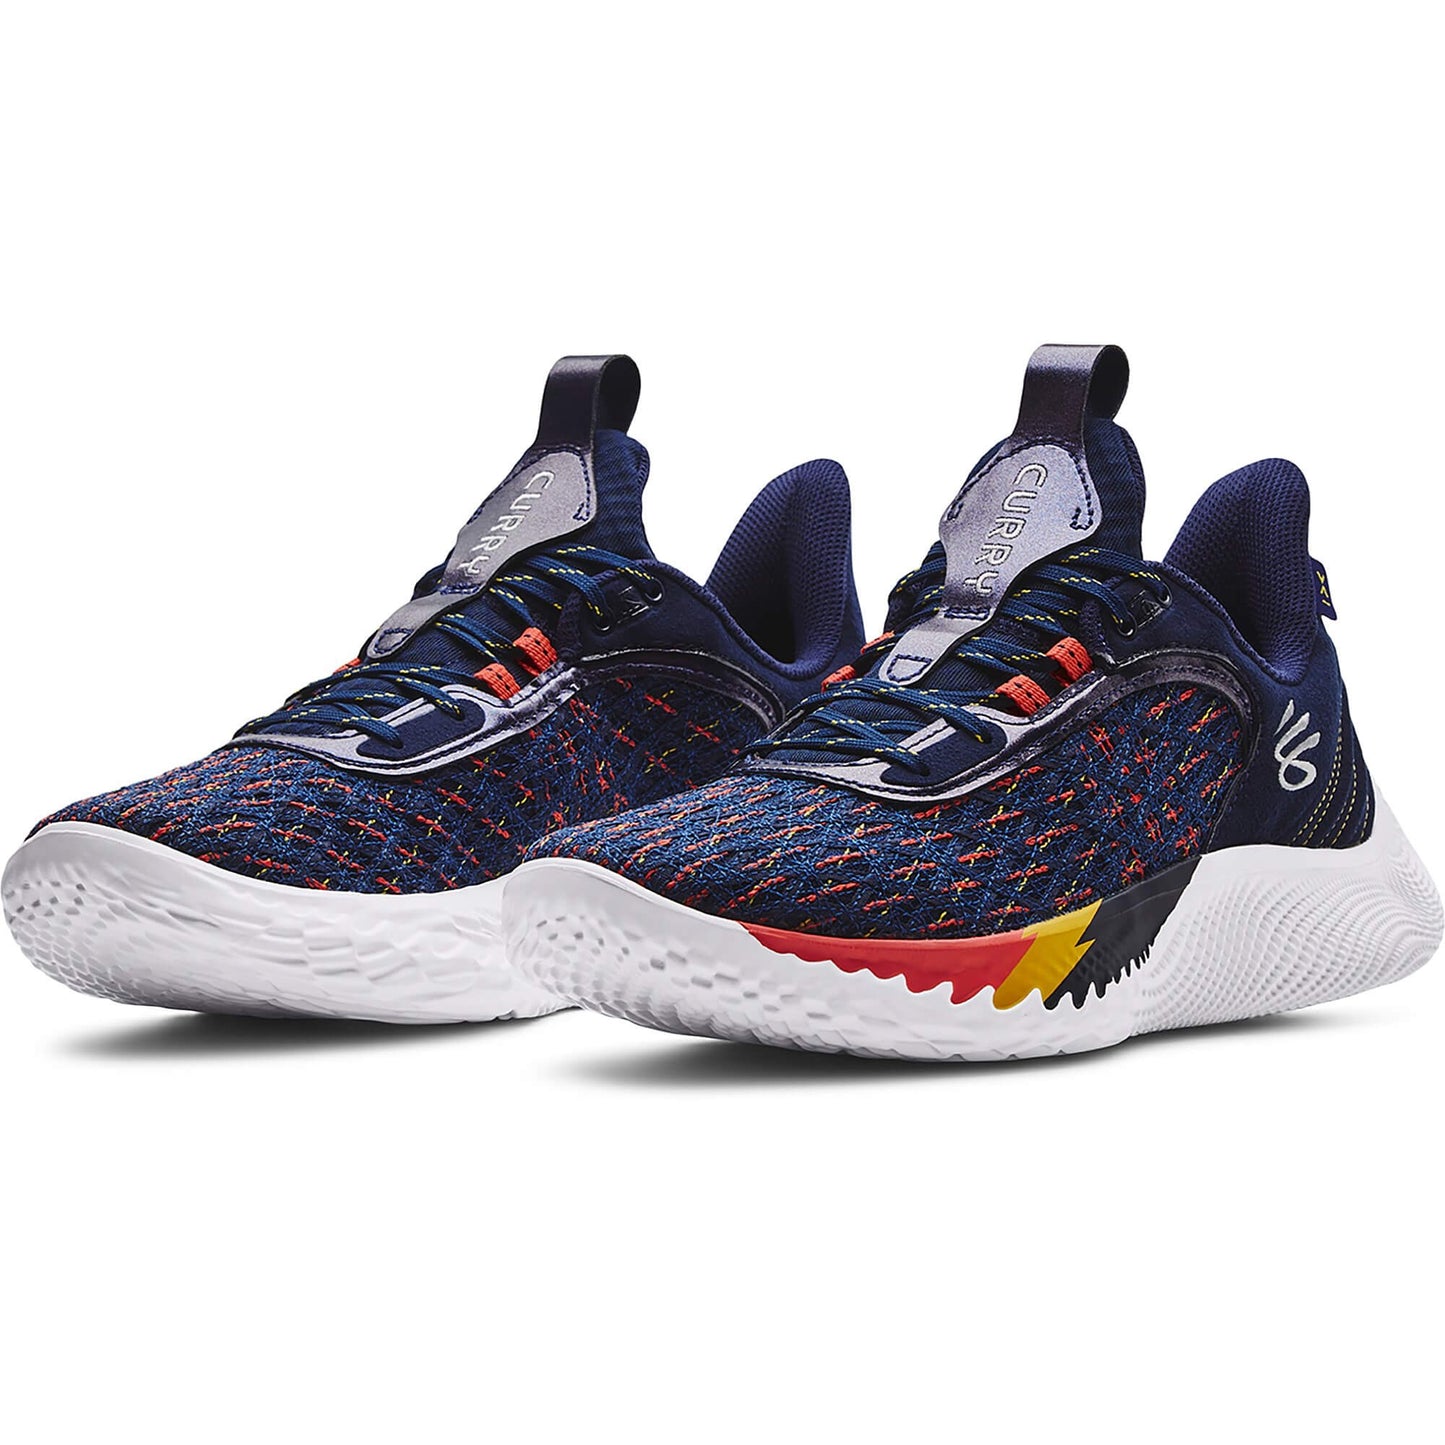 Under Armour Unisex Curry Flow 9 Basketball Shoes Midnight Navy / Orange